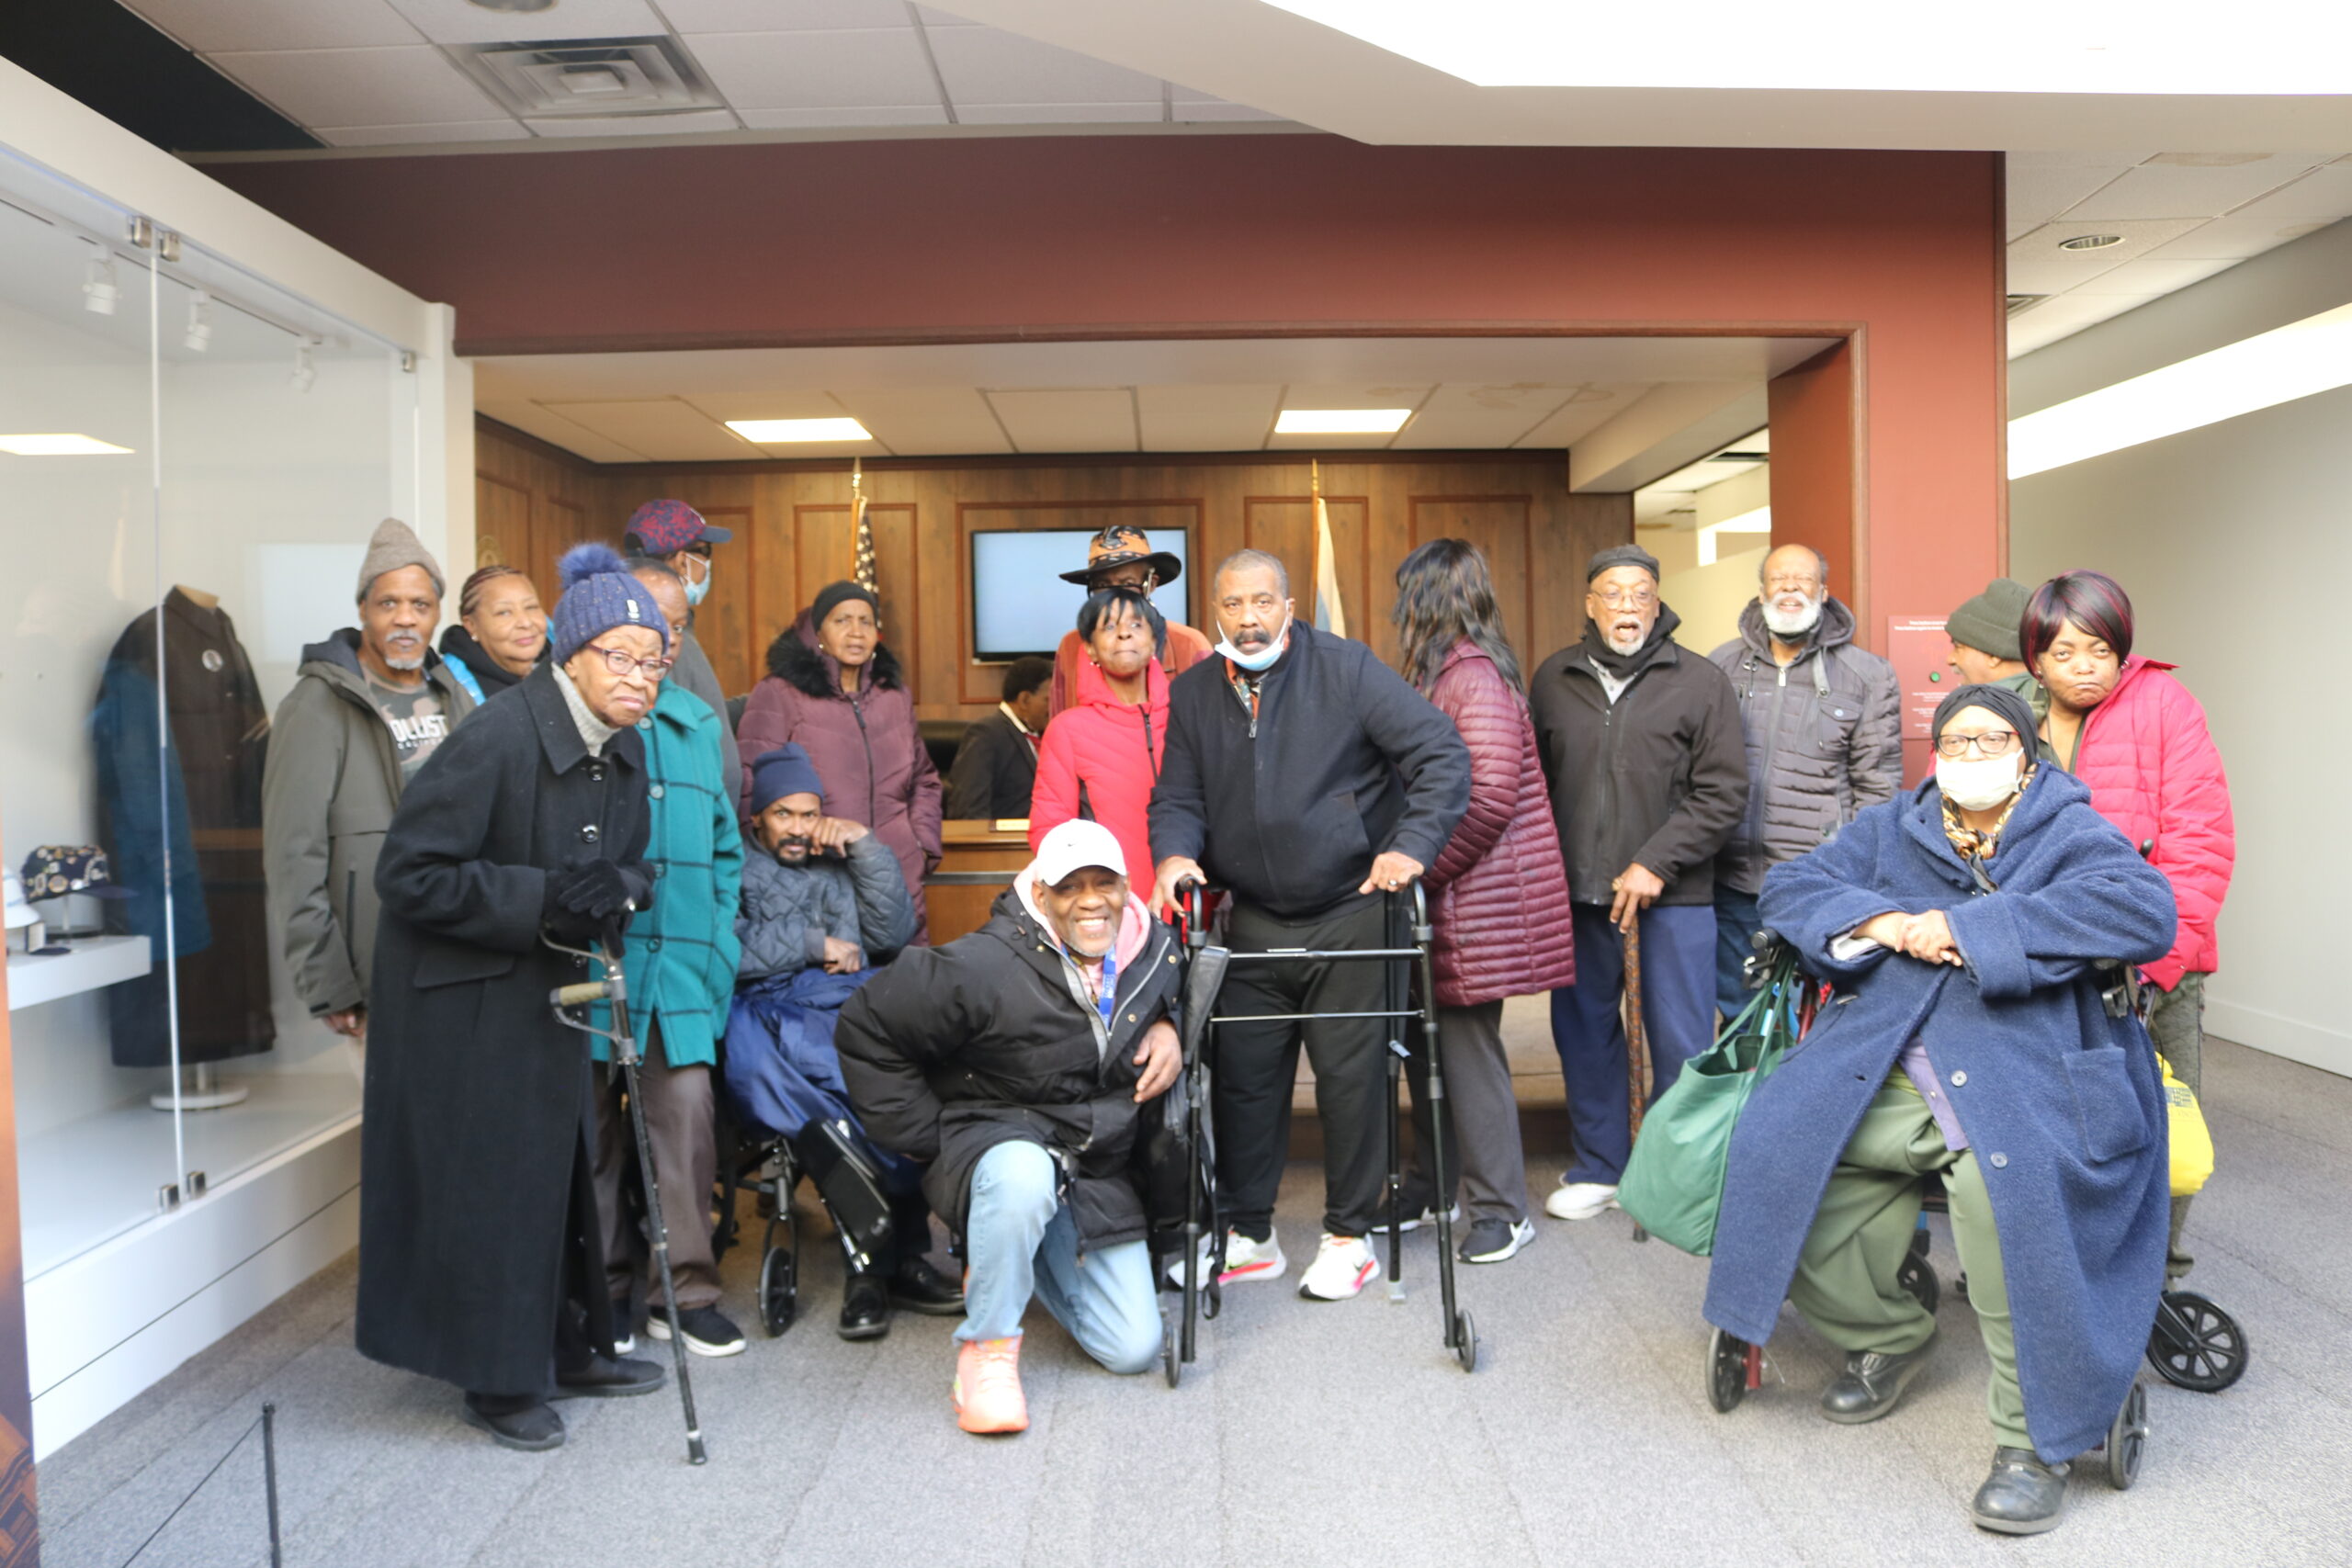 Our Adult Day Service (ADS) program for seniors and adults with disabilities takes a trip to The DuSable Black History Museum.